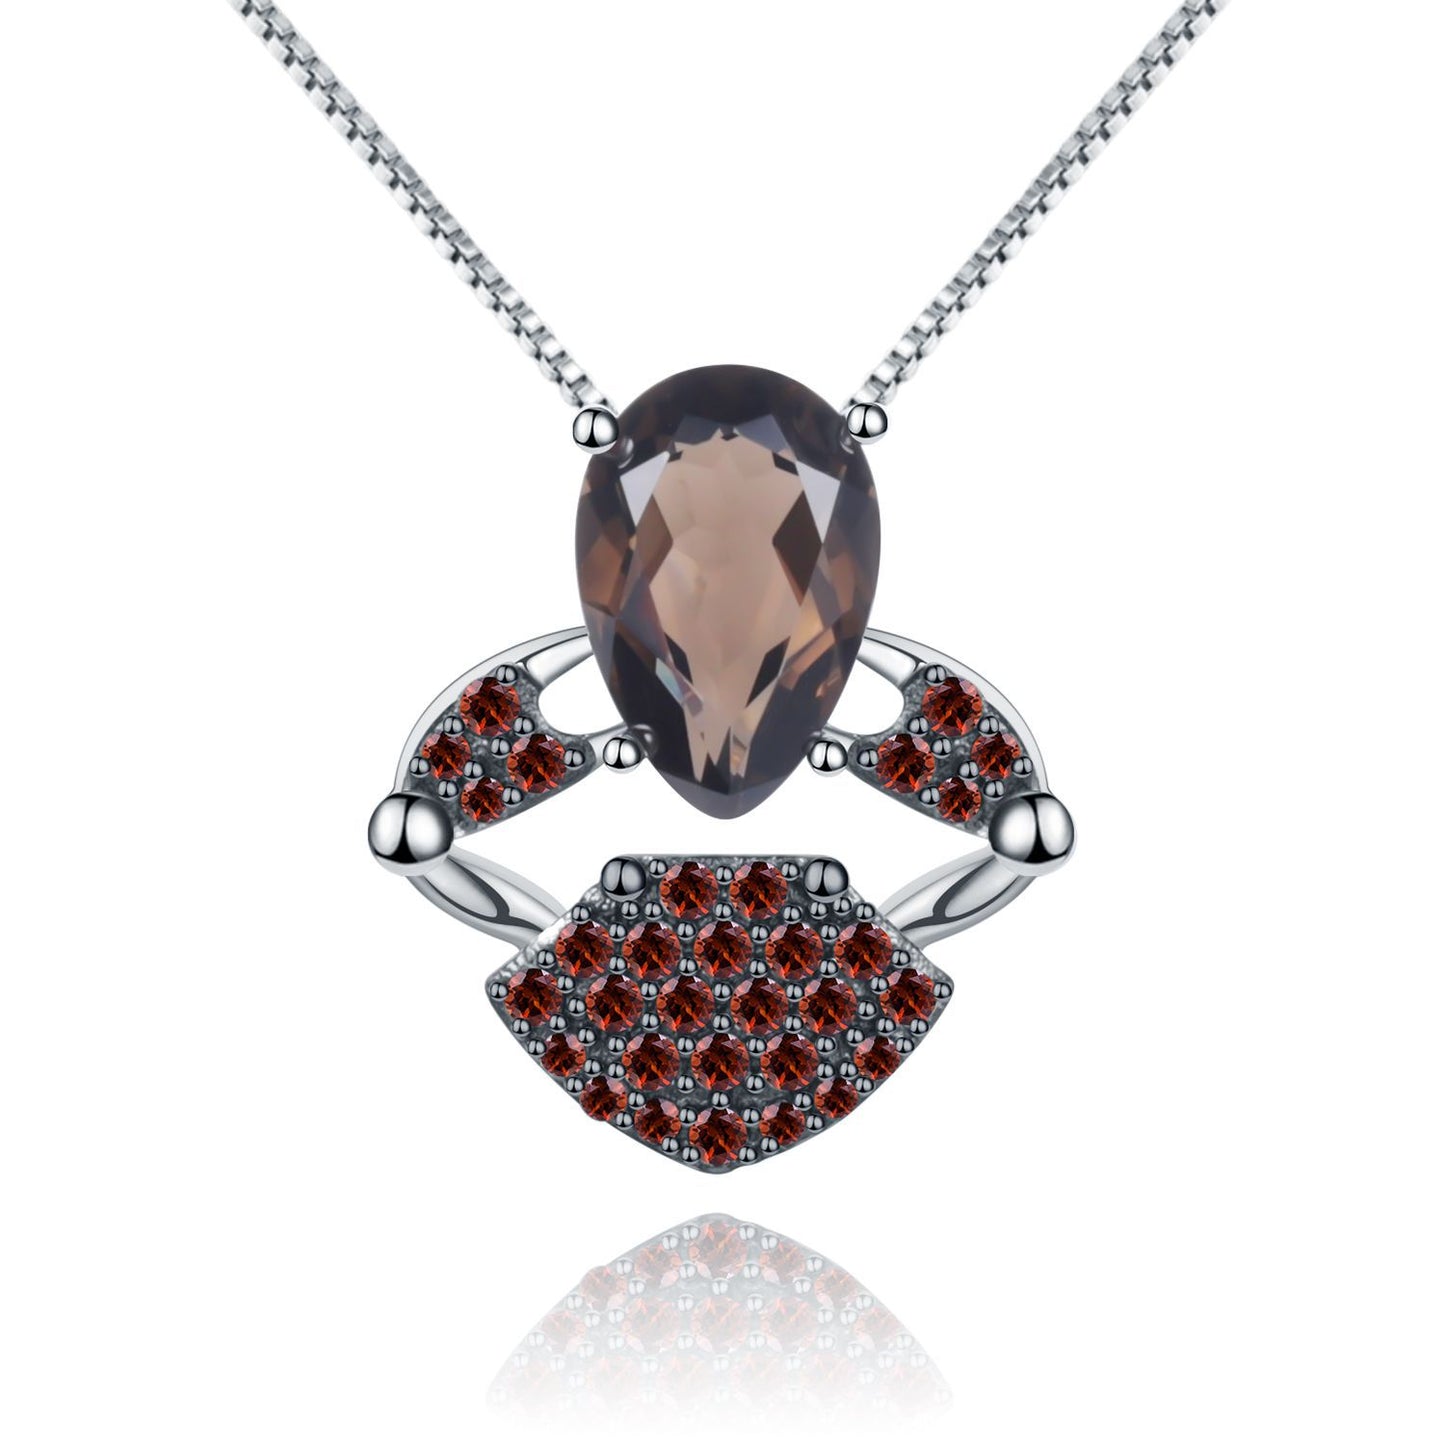 Luxury Design Natural Colourful Gemstone Little Crab Pendant Silver Necklace for Women